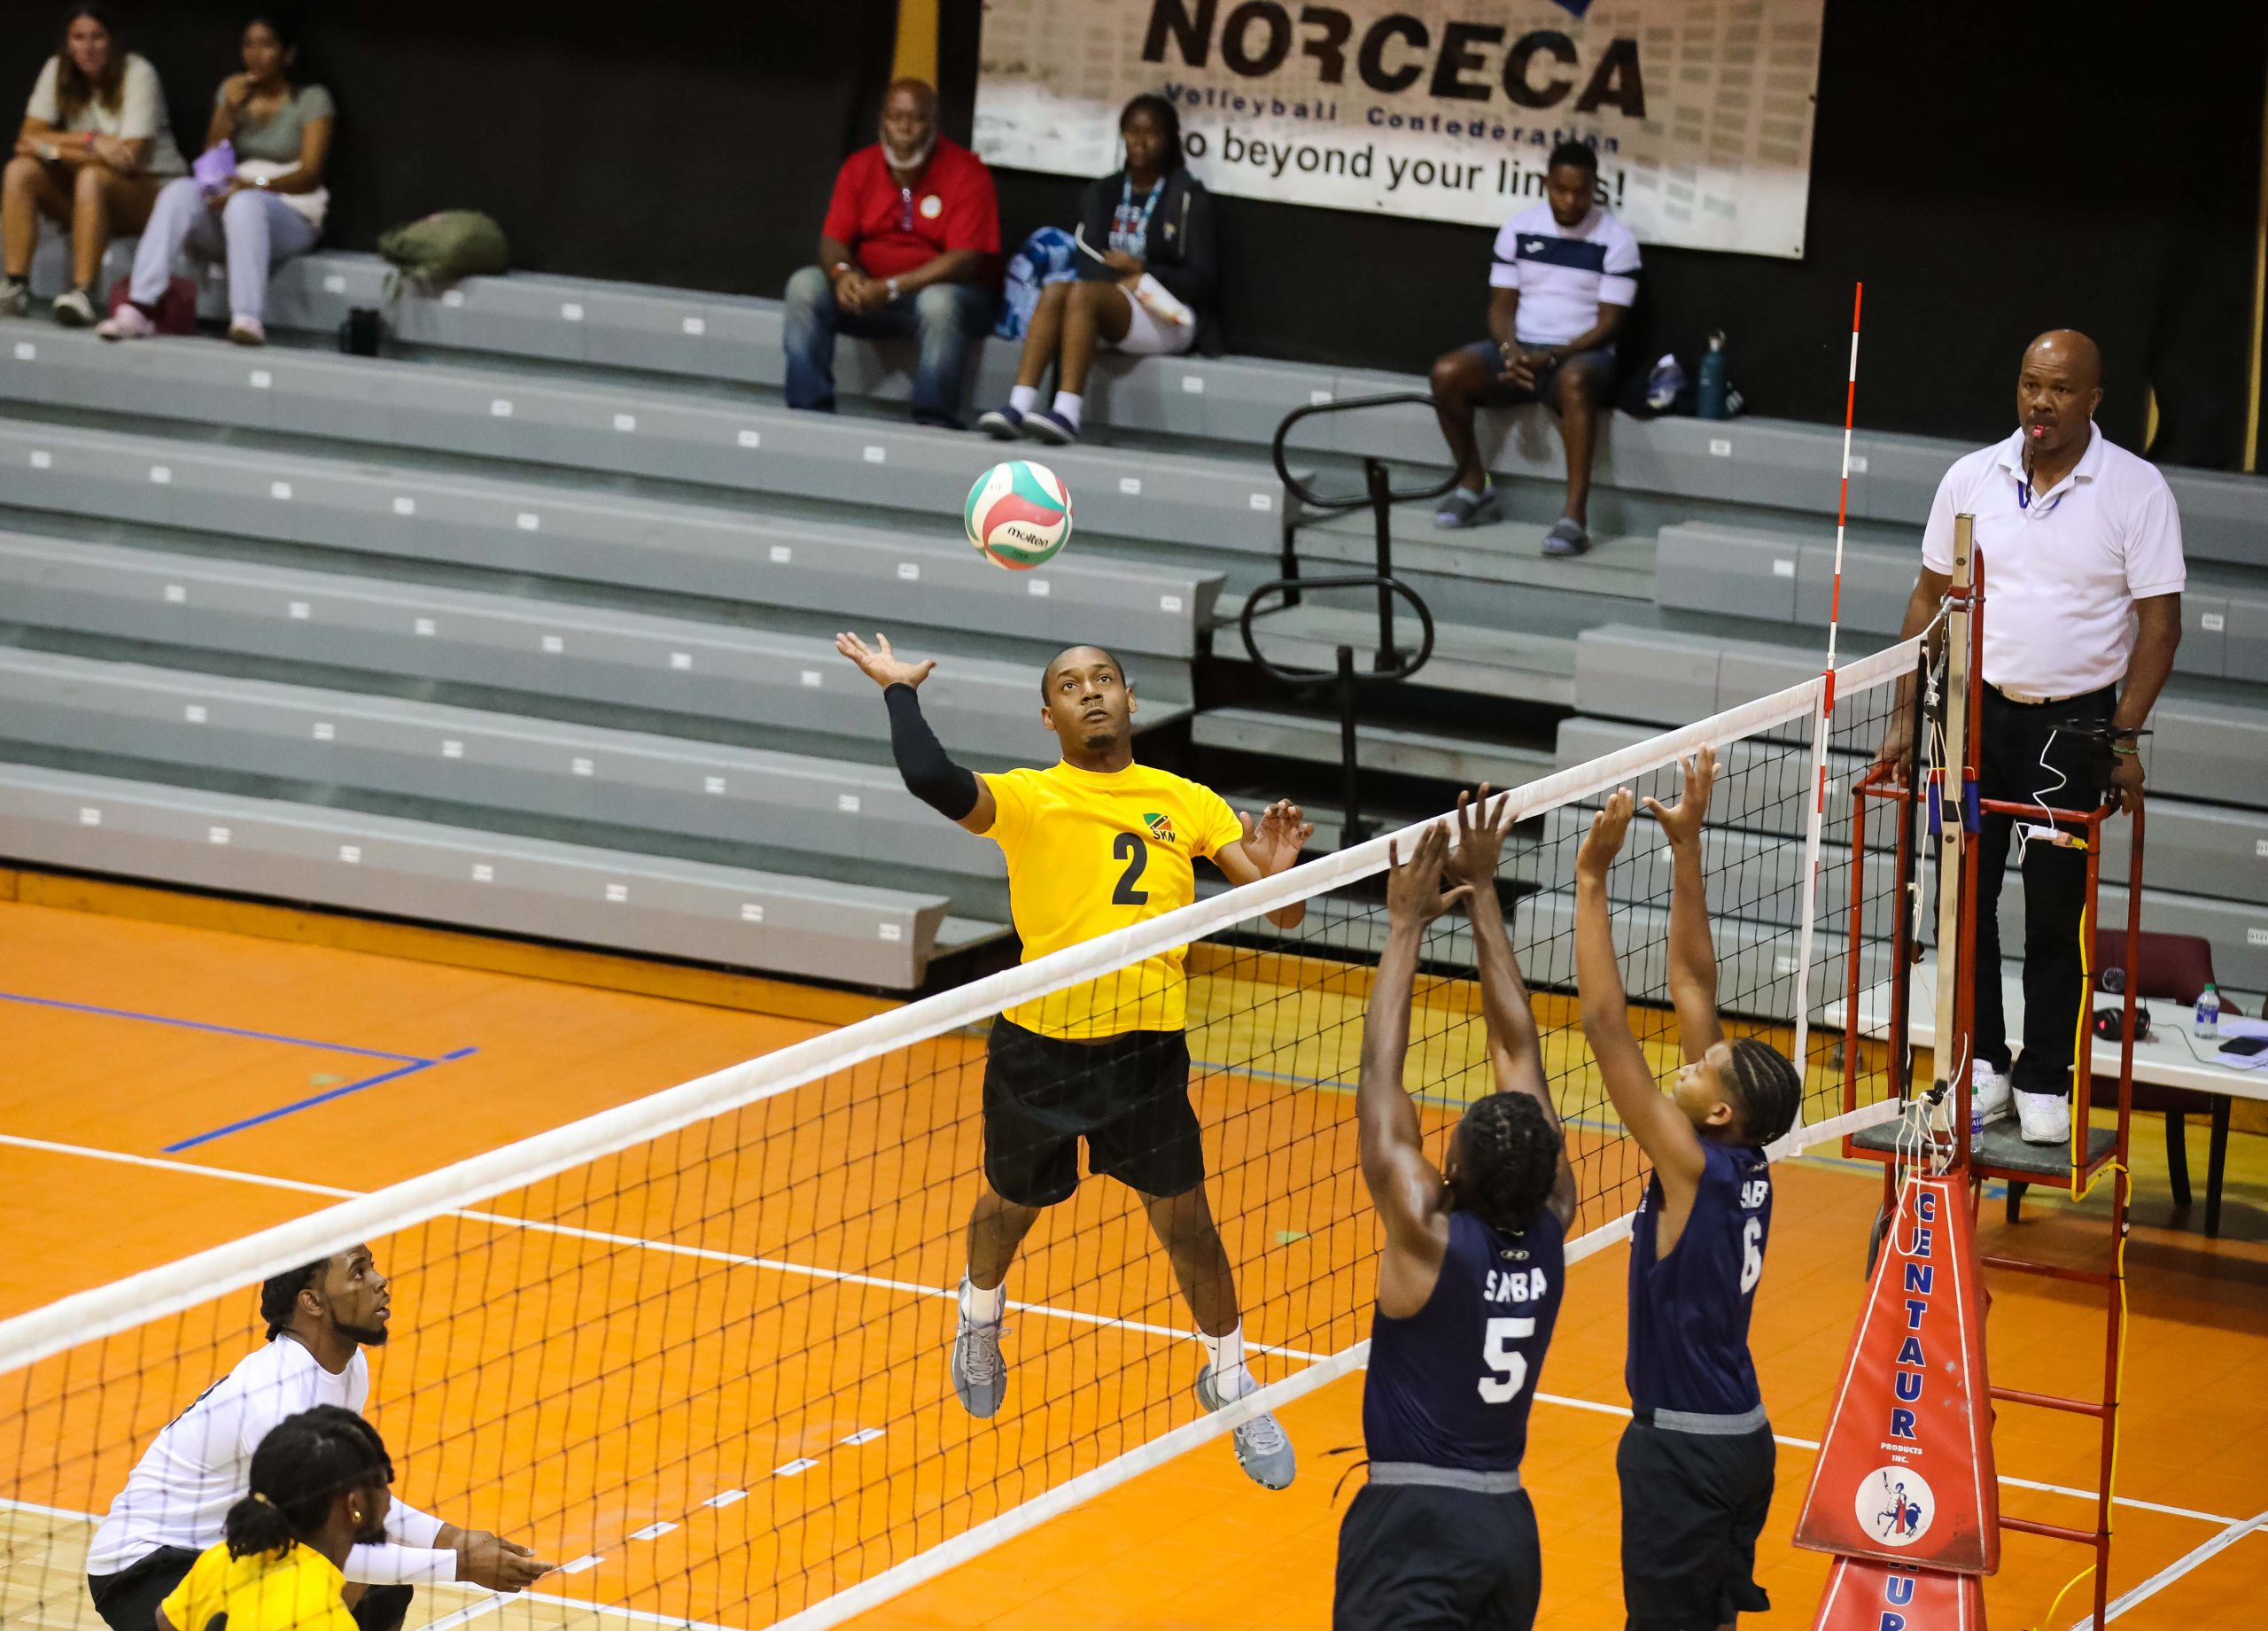 Third victory for St. Kitts and Nevis, without conceding a set